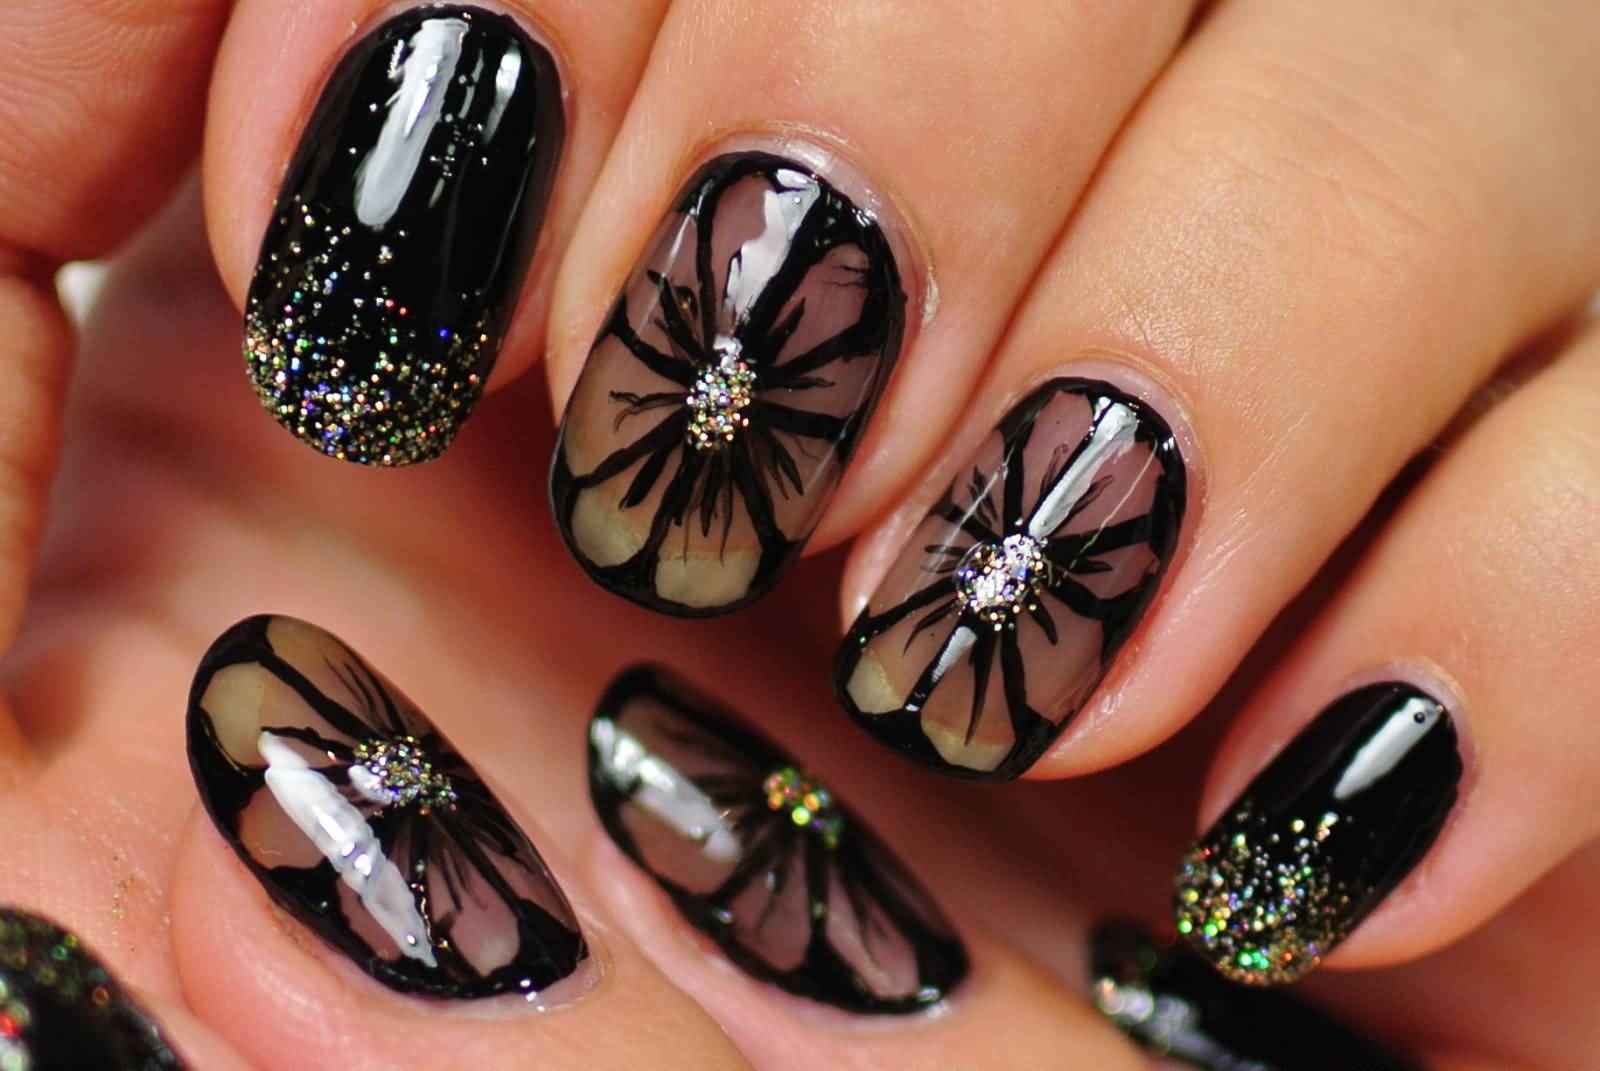 Black Nails With Flowers Nail Art Design